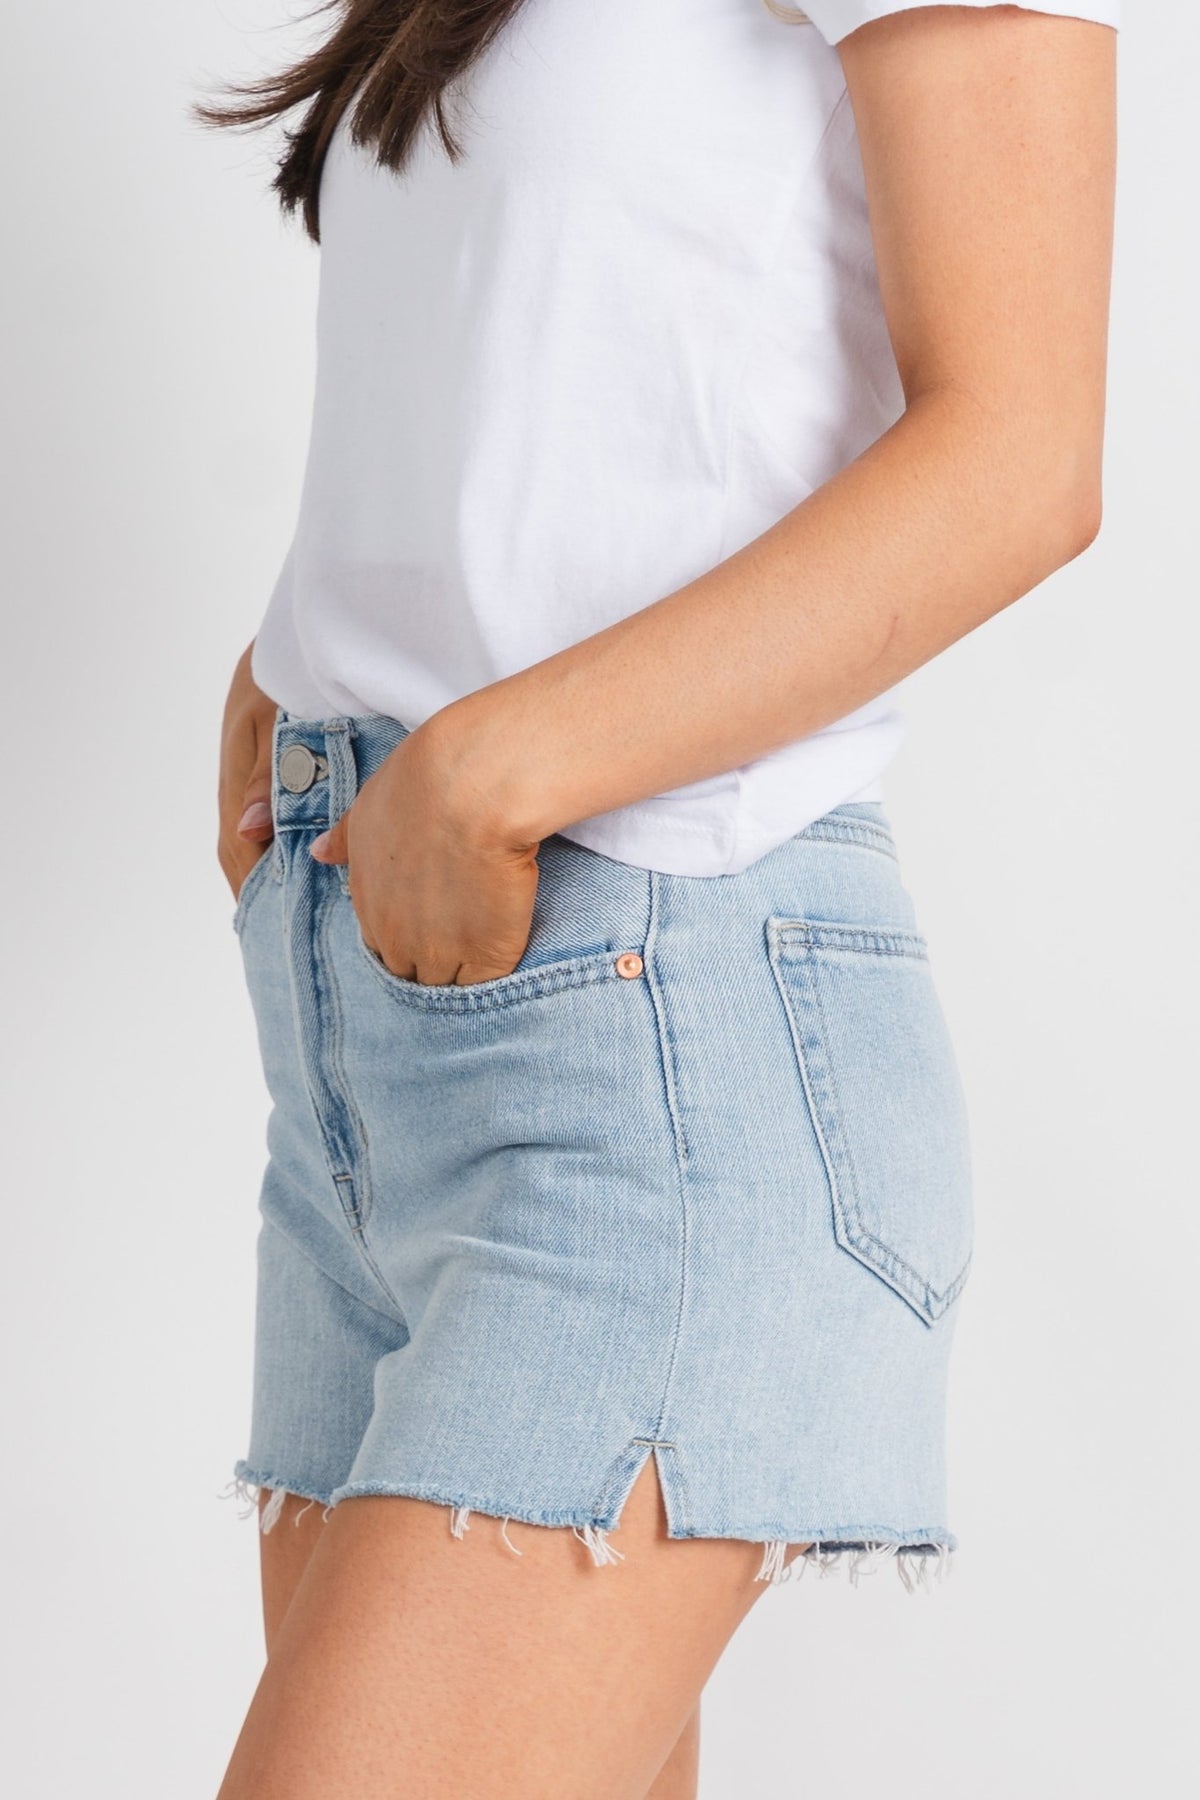 High rise fray hem denim shorts light denim - Trendy Shorts - Cute Vacation Collection at Lush Fashion Lounge Boutique in Oklahoma City